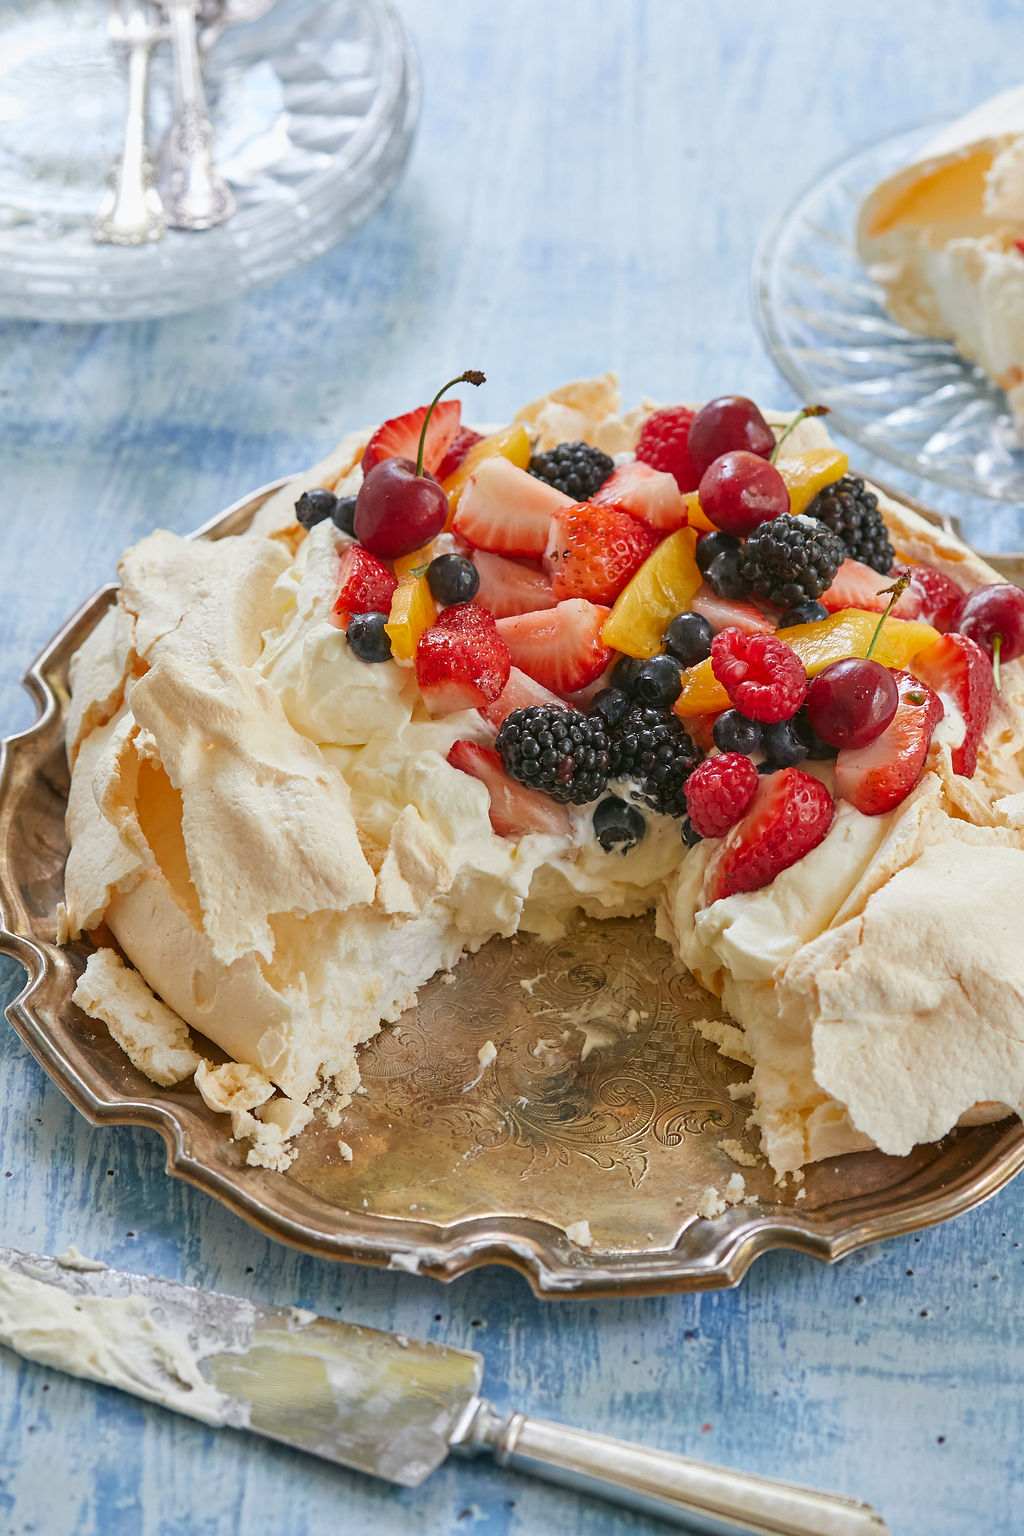 A look at the interior of my Perfect Pavlova in 5 simple steps.